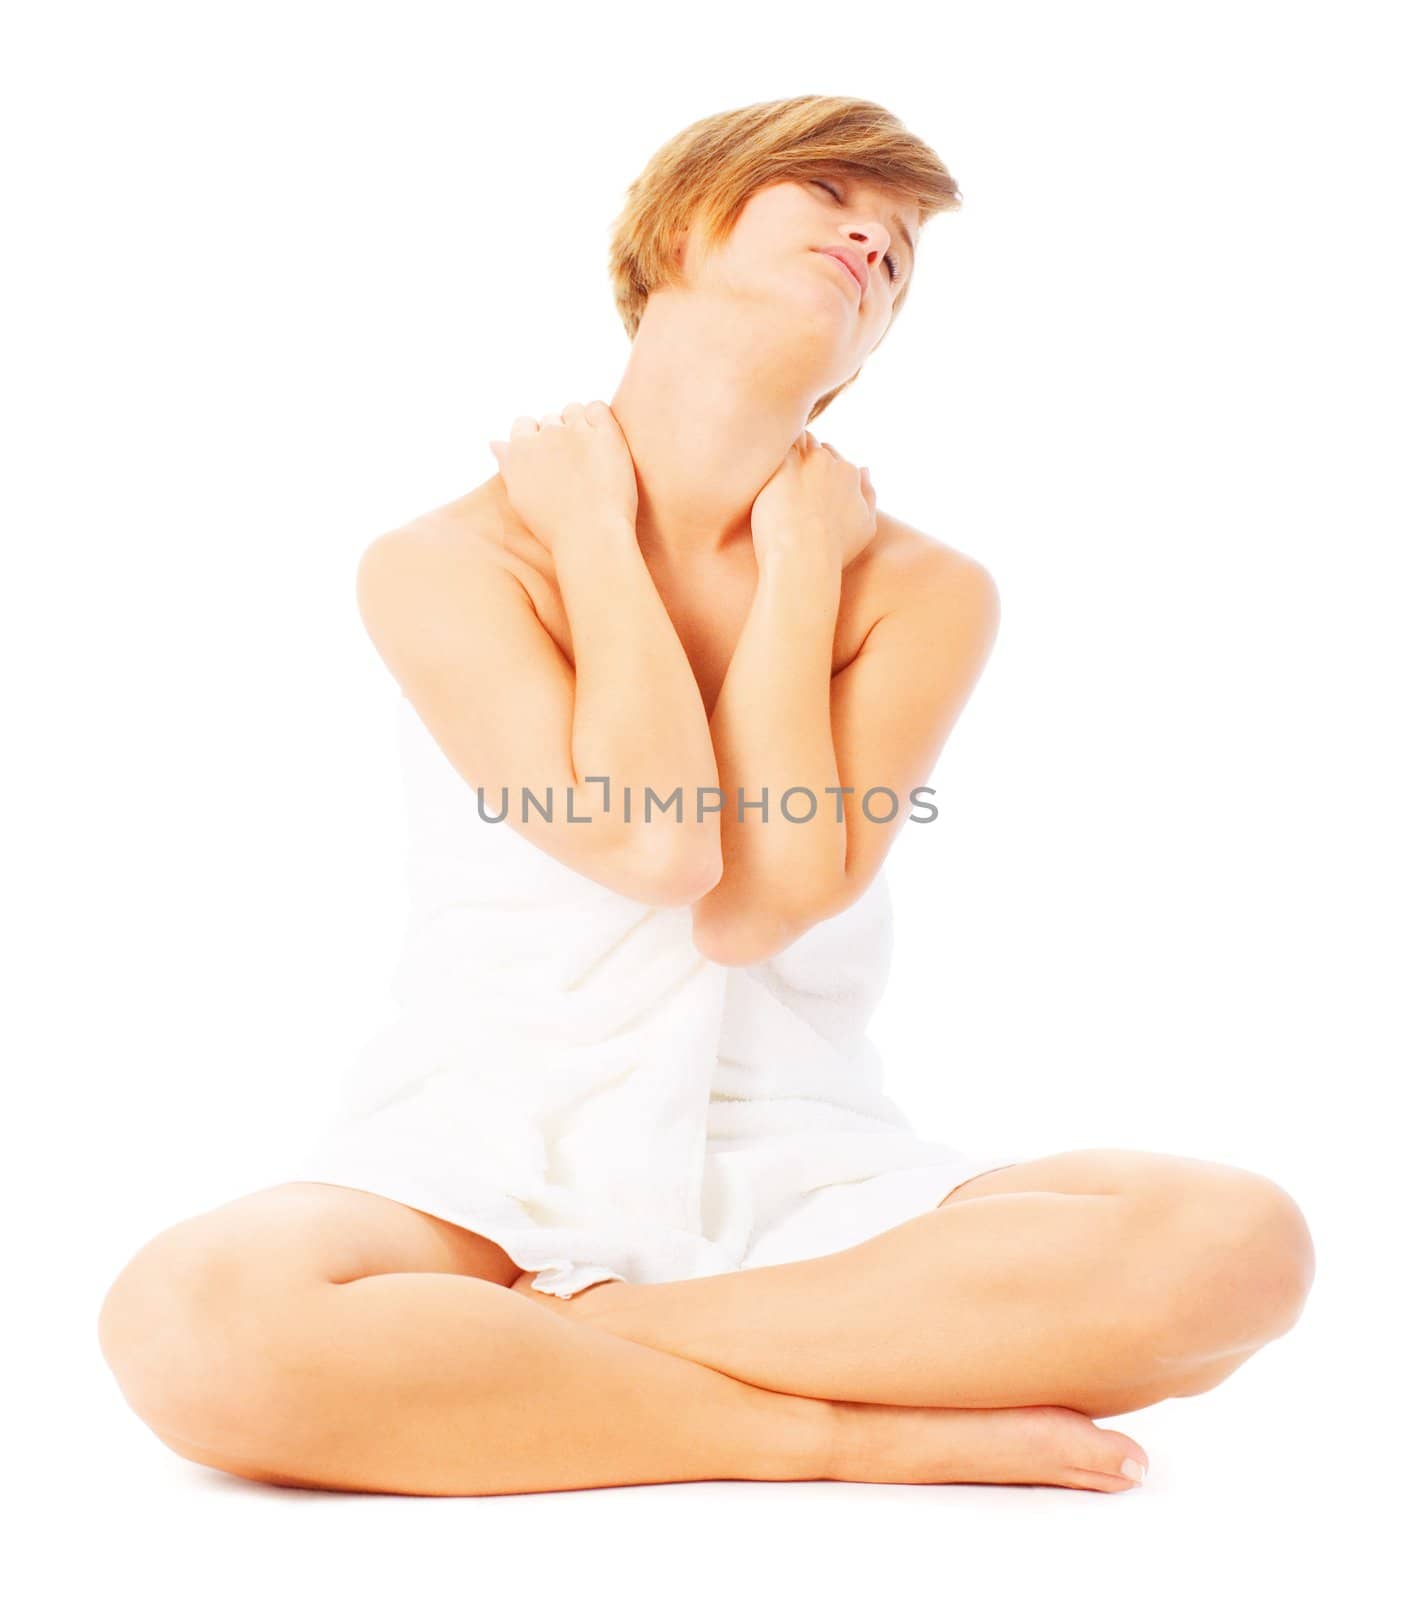 Woman in towel massaging her shoulders, from a complete series of photos.